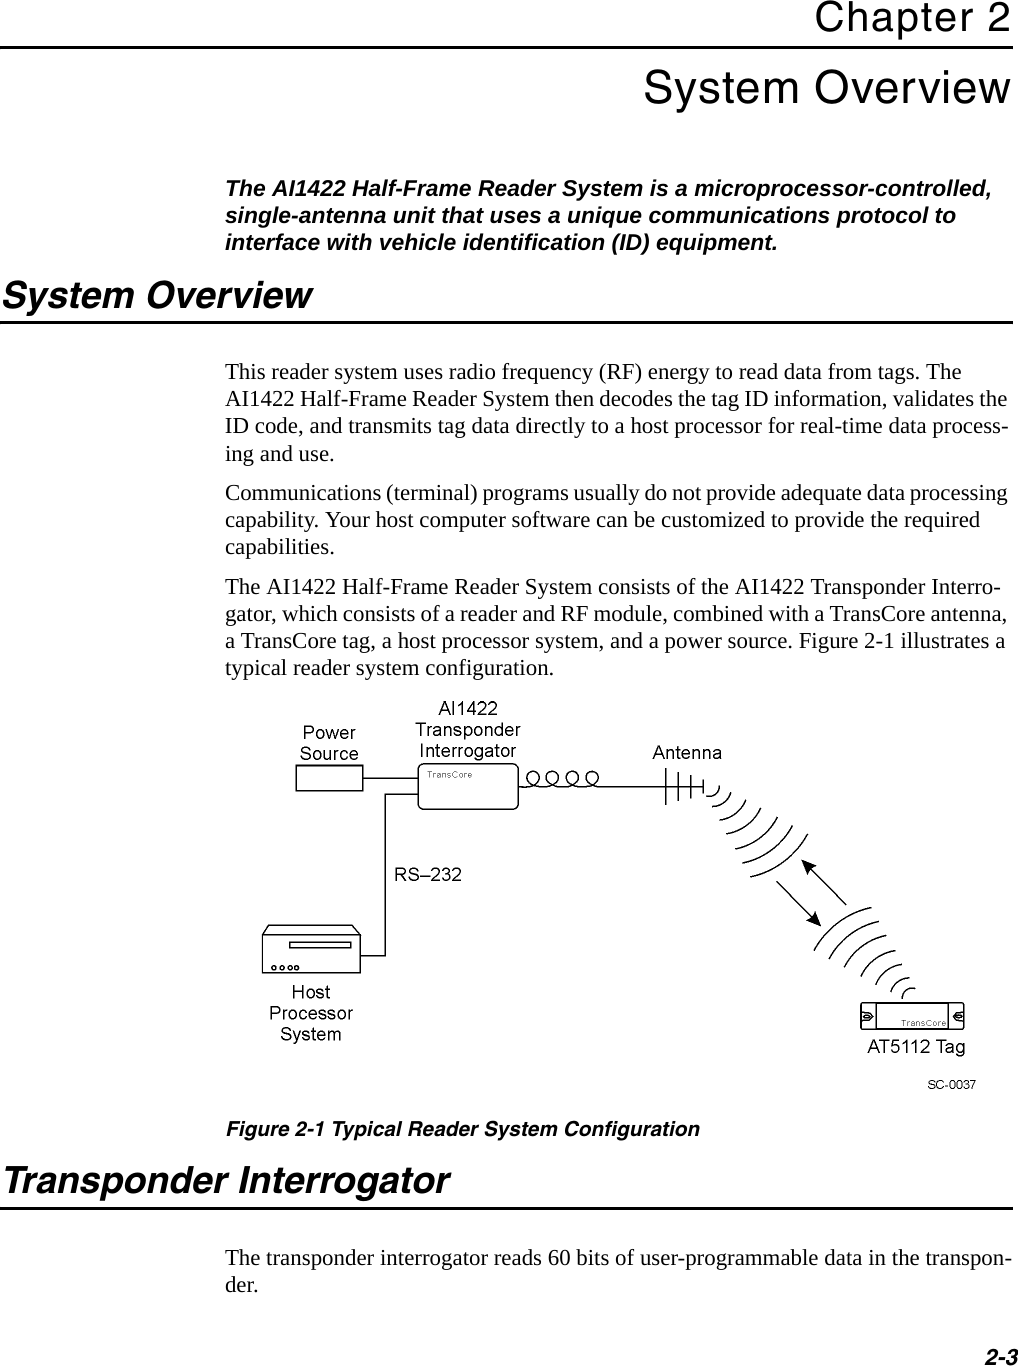 2-3Chapter 2System OverviewThe AI1422 Half-Frame Reader System is a microprocessor-controlled, single-antenna unit that uses a unique communications protocol to interface with vehicle identification (ID) equipment.System OverviewThis reader system uses radio frequency (RF) energy to read data from tags. The AI1422 Half-Frame Reader System then decodes the tag ID information, validates the ID code, and transmits tag data directly to a host processor for real-time data process-ing and use.Communications (terminal) programs usually do not provide adequate data processing capability. Your host computer software can be customized to provide the required capabilities.The AI1422 Half-Frame Reader System consists of the AI1422 Transponder Interro-gator, which consists of a reader and RF module, combined with a TransCore antenna, a TransCore tag, a host processor system, and a power source. Figure 2-1 illustrates a typical reader system configuration.Figure 2-1 Typical Reader System ConfigurationTransponder InterrogatorThe transponder interrogator reads 60 bits of user-programmable data in the transpon-der.